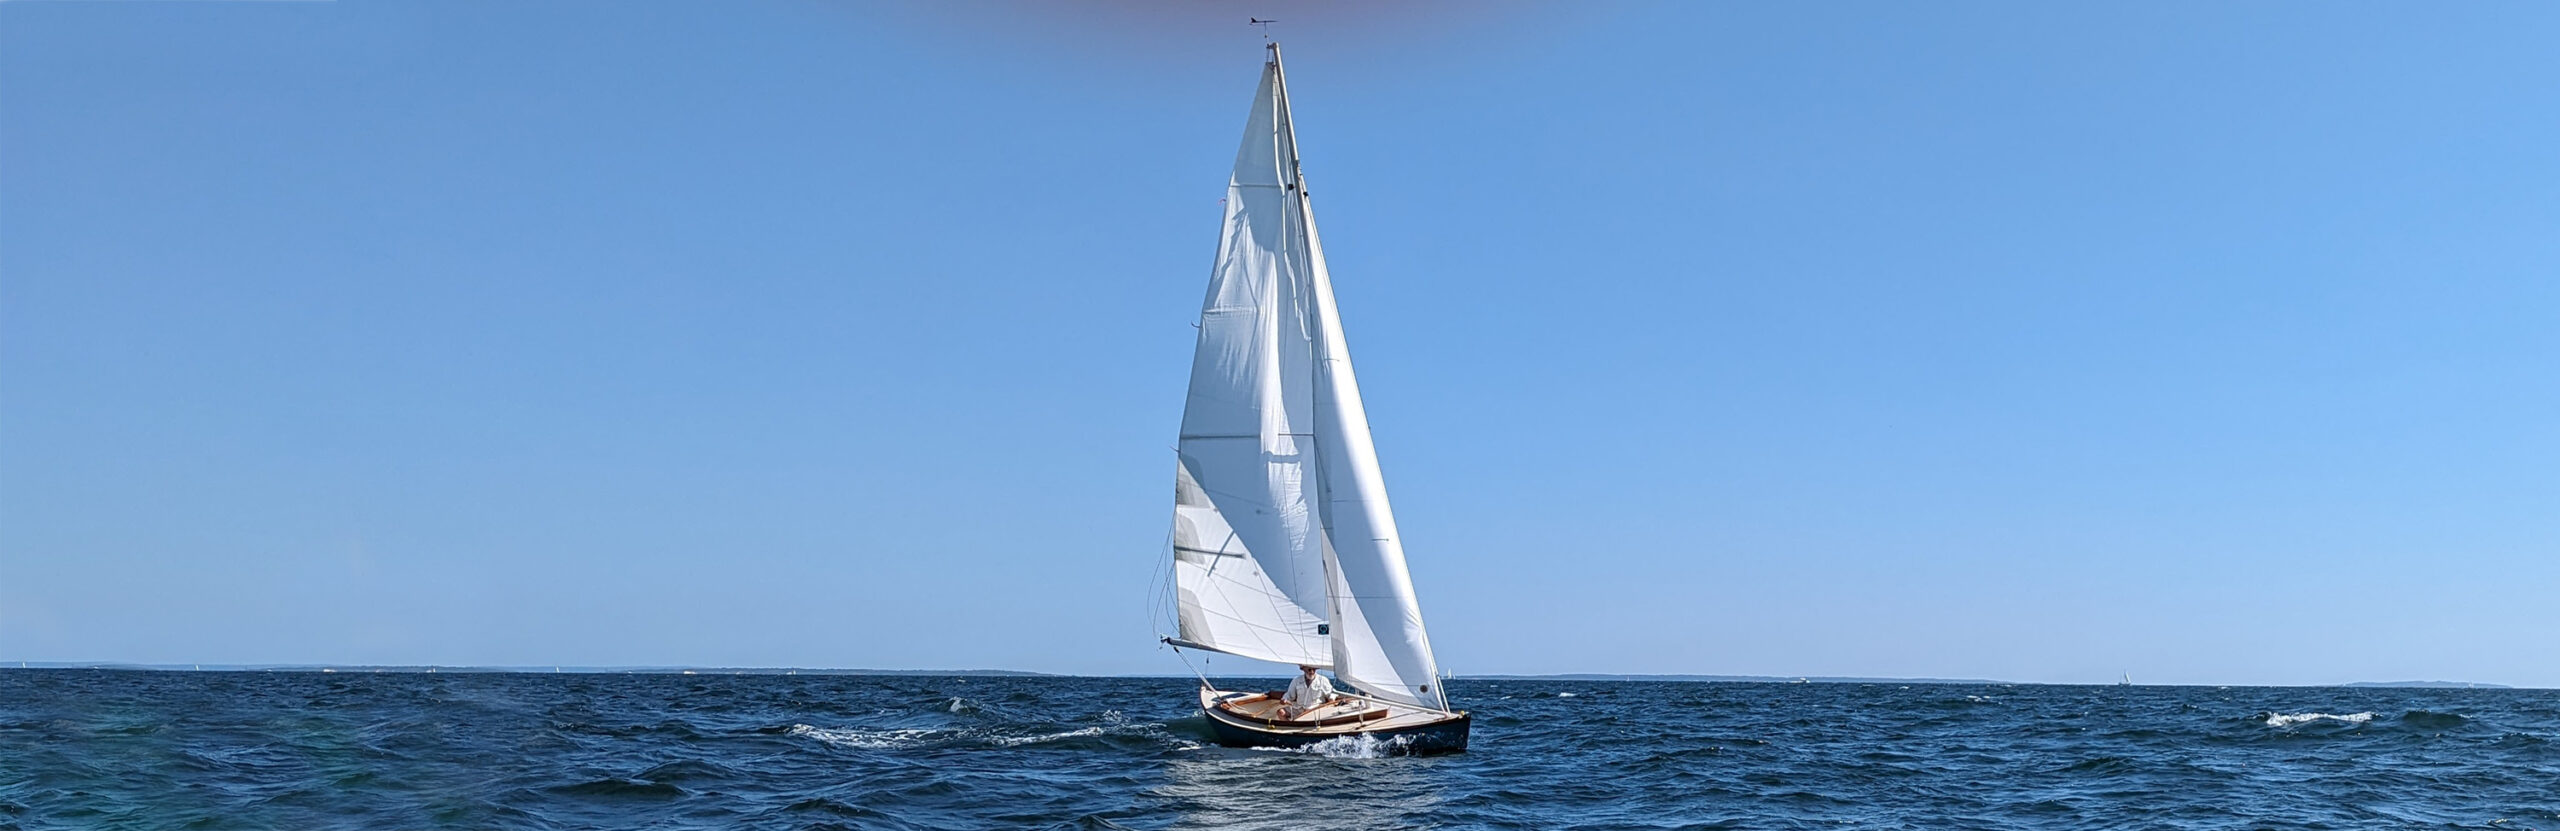 42' Double-ended Schooner Wild Cat ~ Sail Boat Designs by Tad Roberts